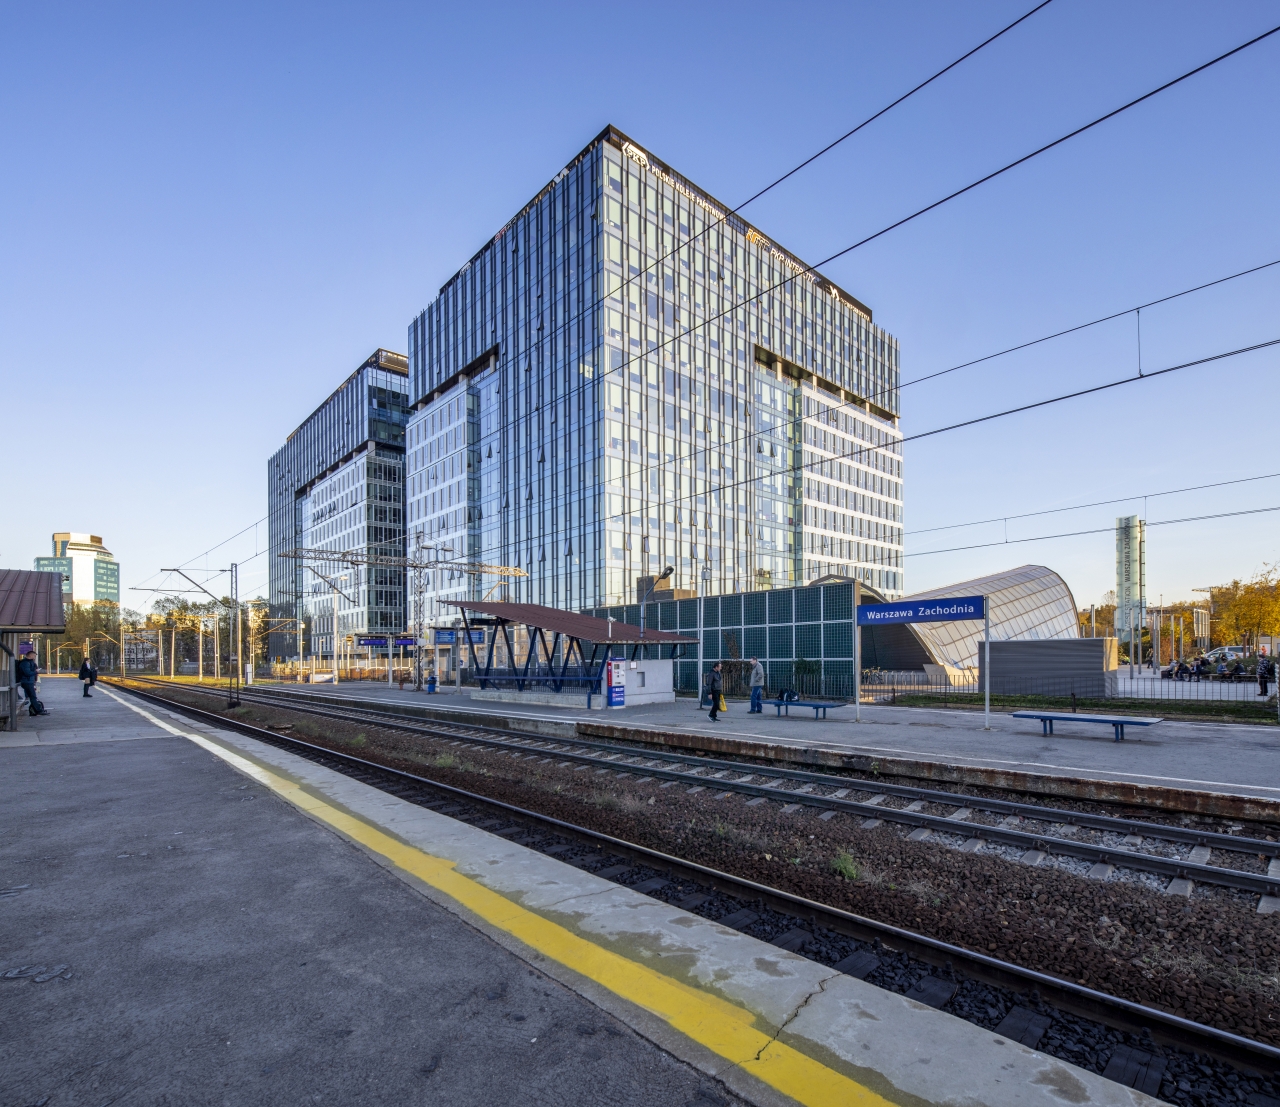 View of the buildings from Warsaw West Railway Station